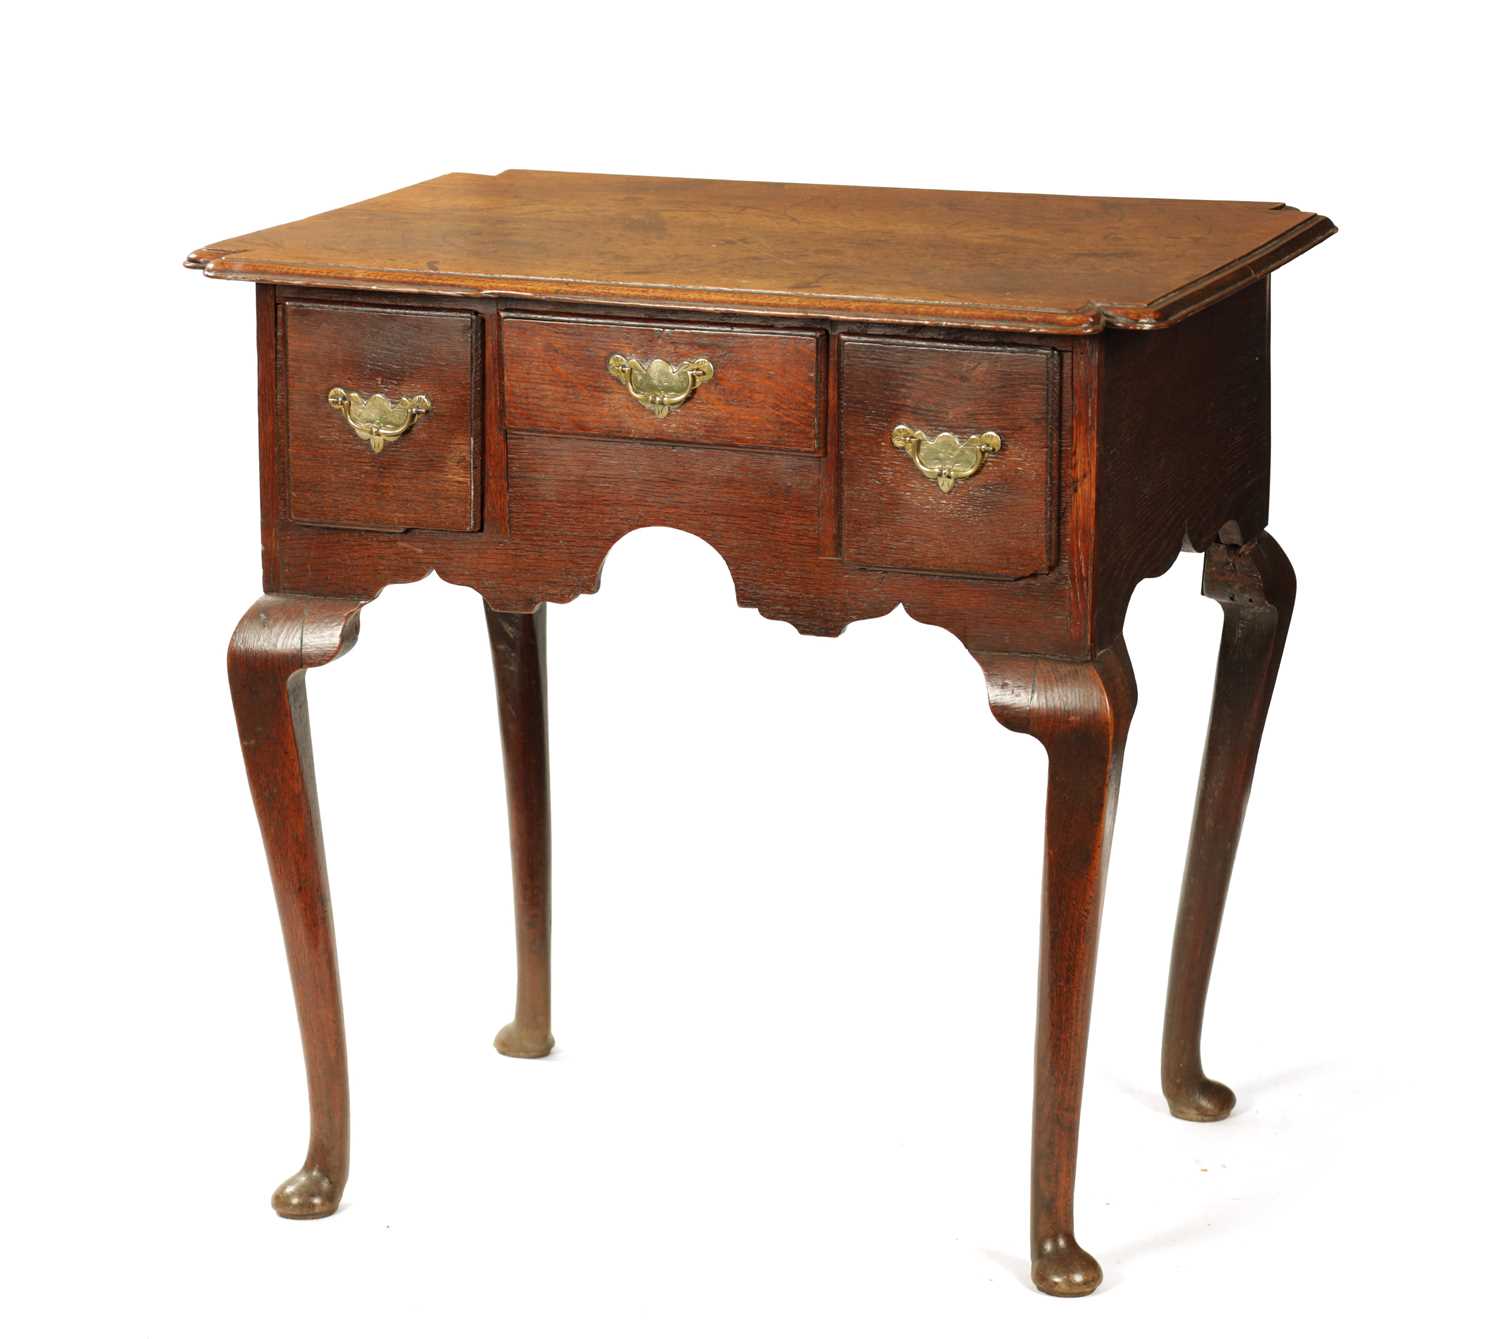 Lot 301 - A GOOD QUEEN ANNE OAK LOWBOY WITH DOUBLE REENTRANT CORNERED TOP